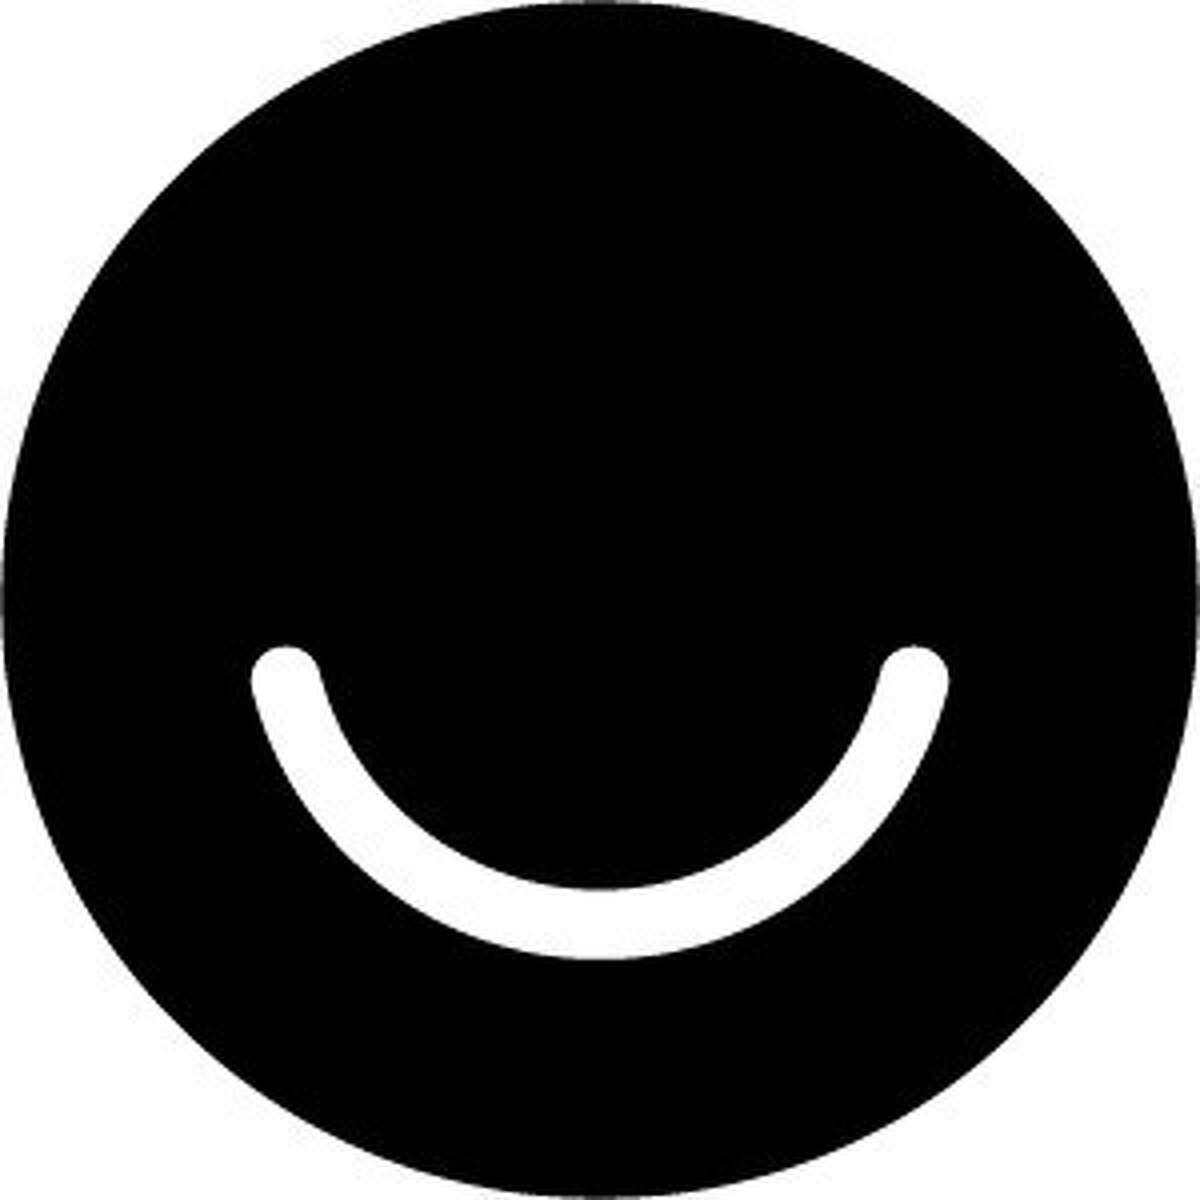 Ello's simplicity is reflected in its logo, a black-and-white smiley face.